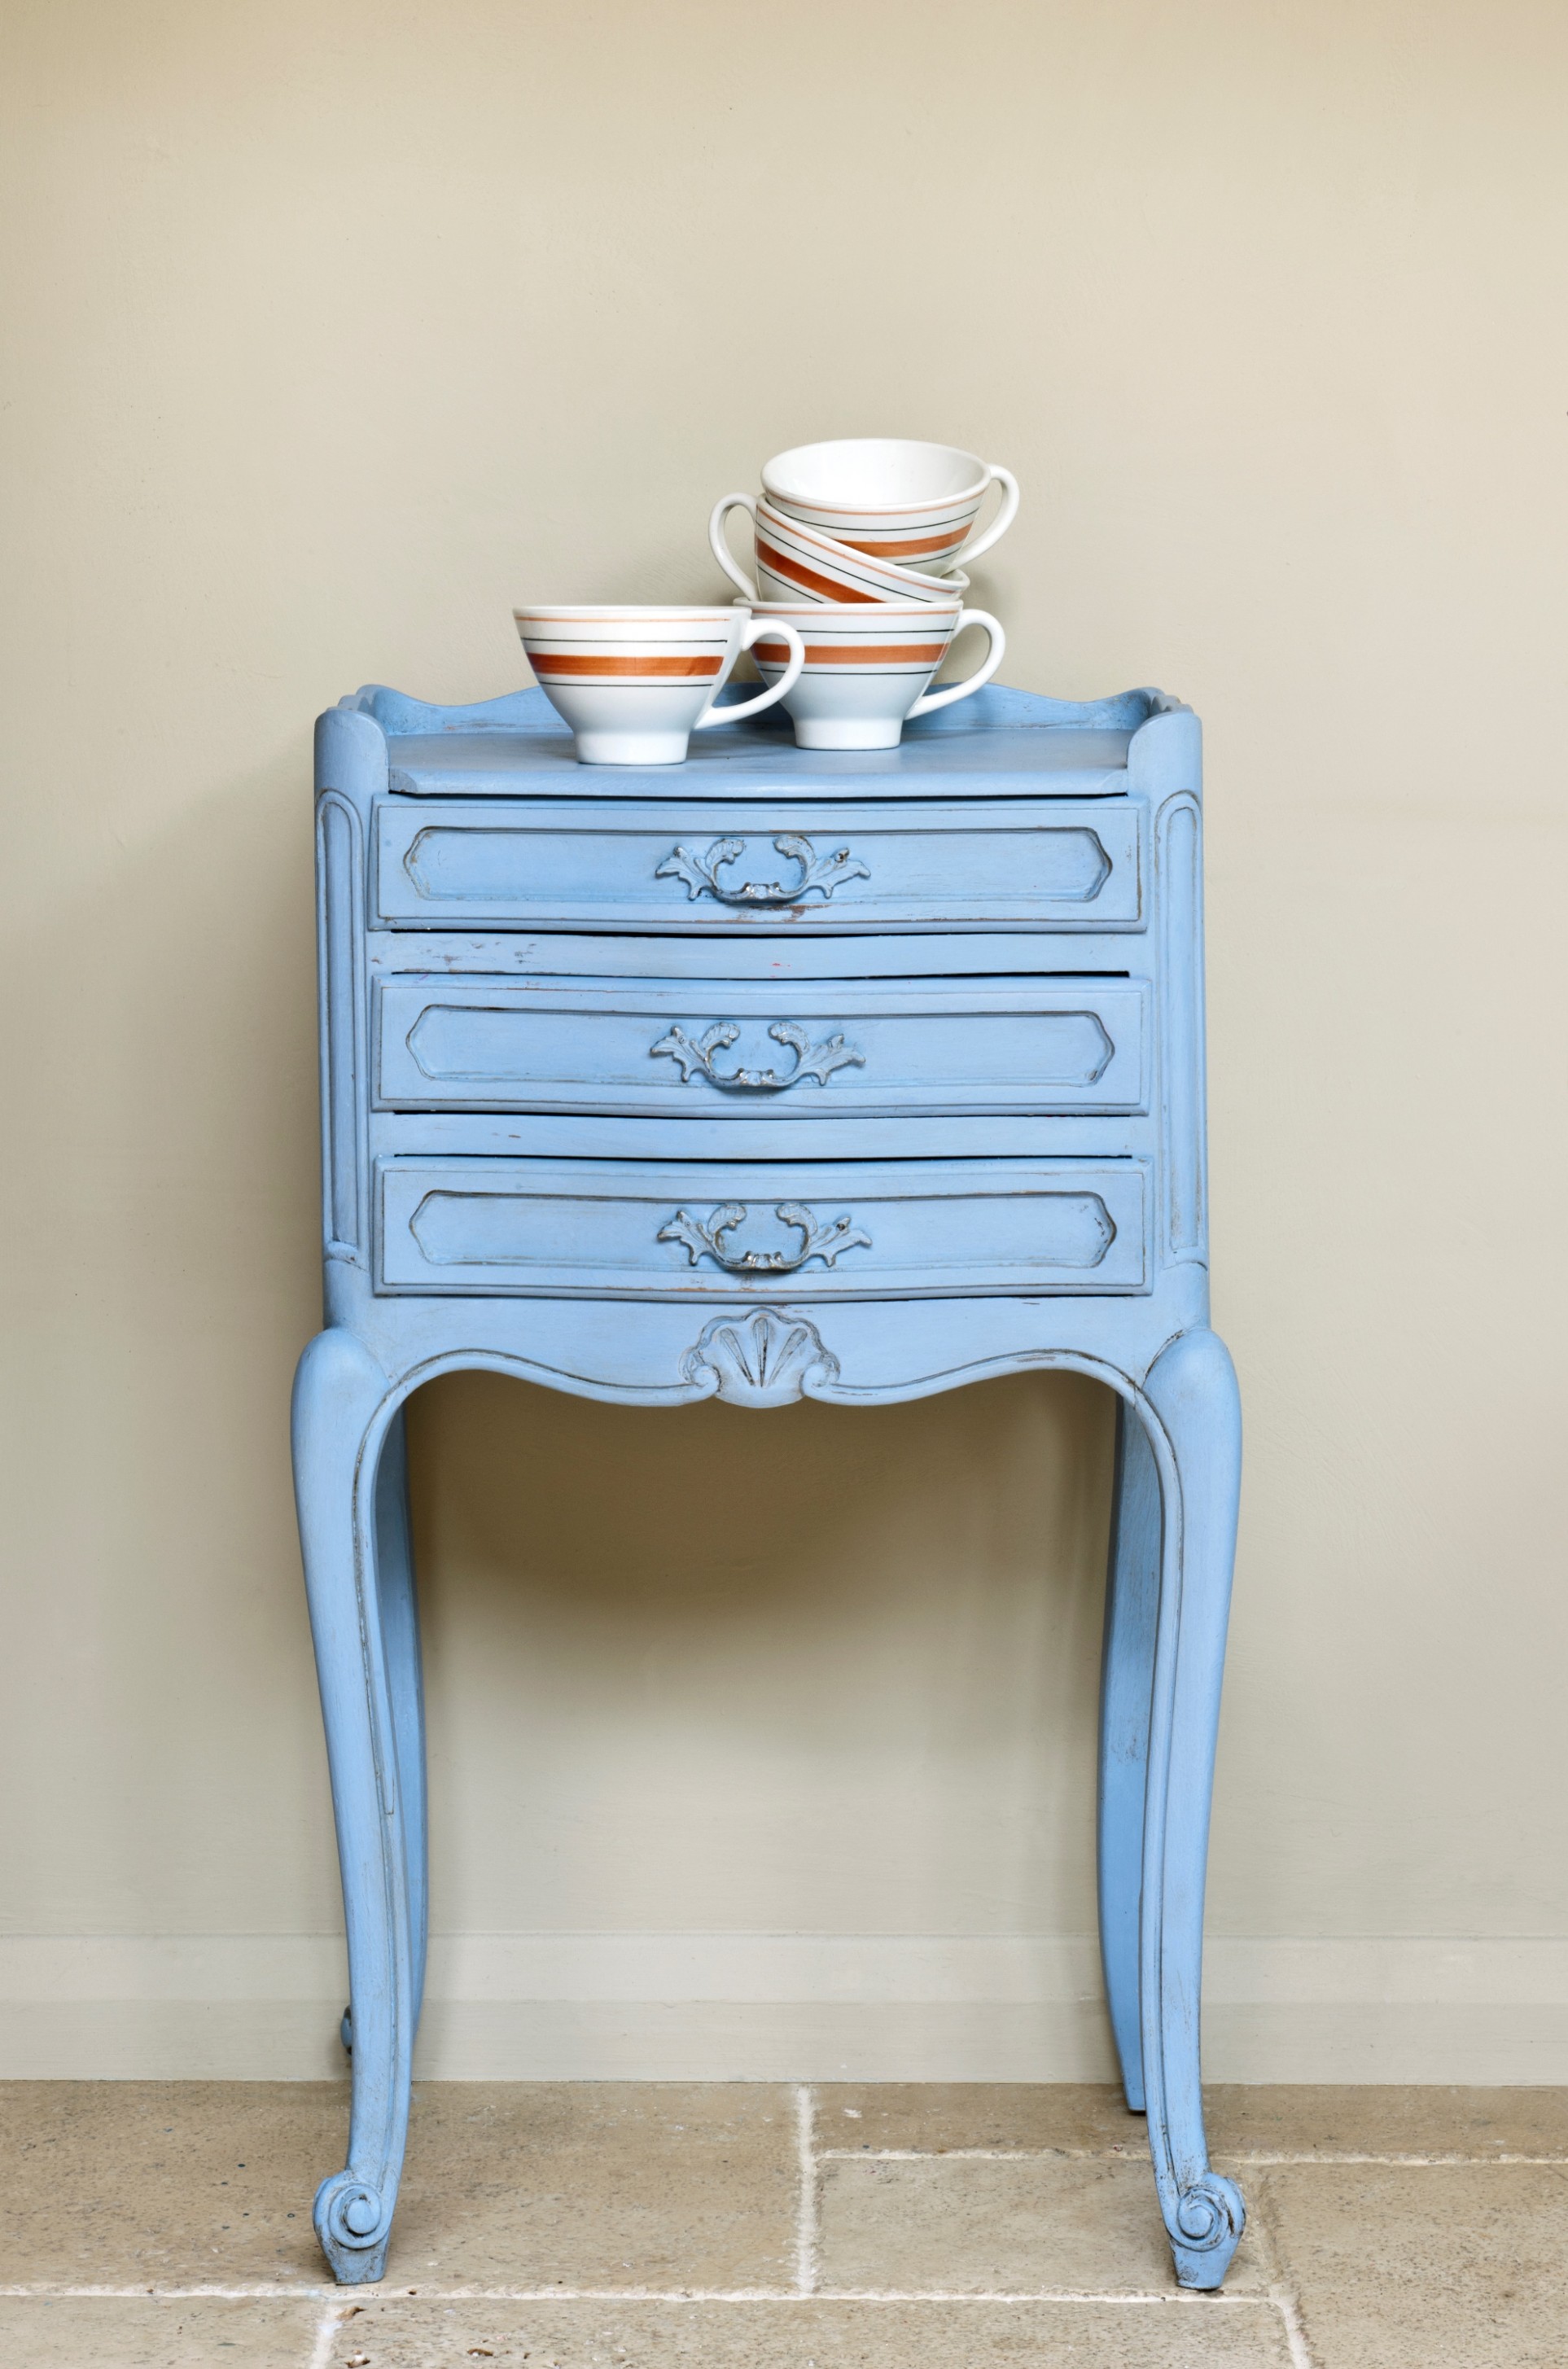 Chalk South Africa – Fashion Dresses Buy Annie Sloan Chalk Paint Online South Africa